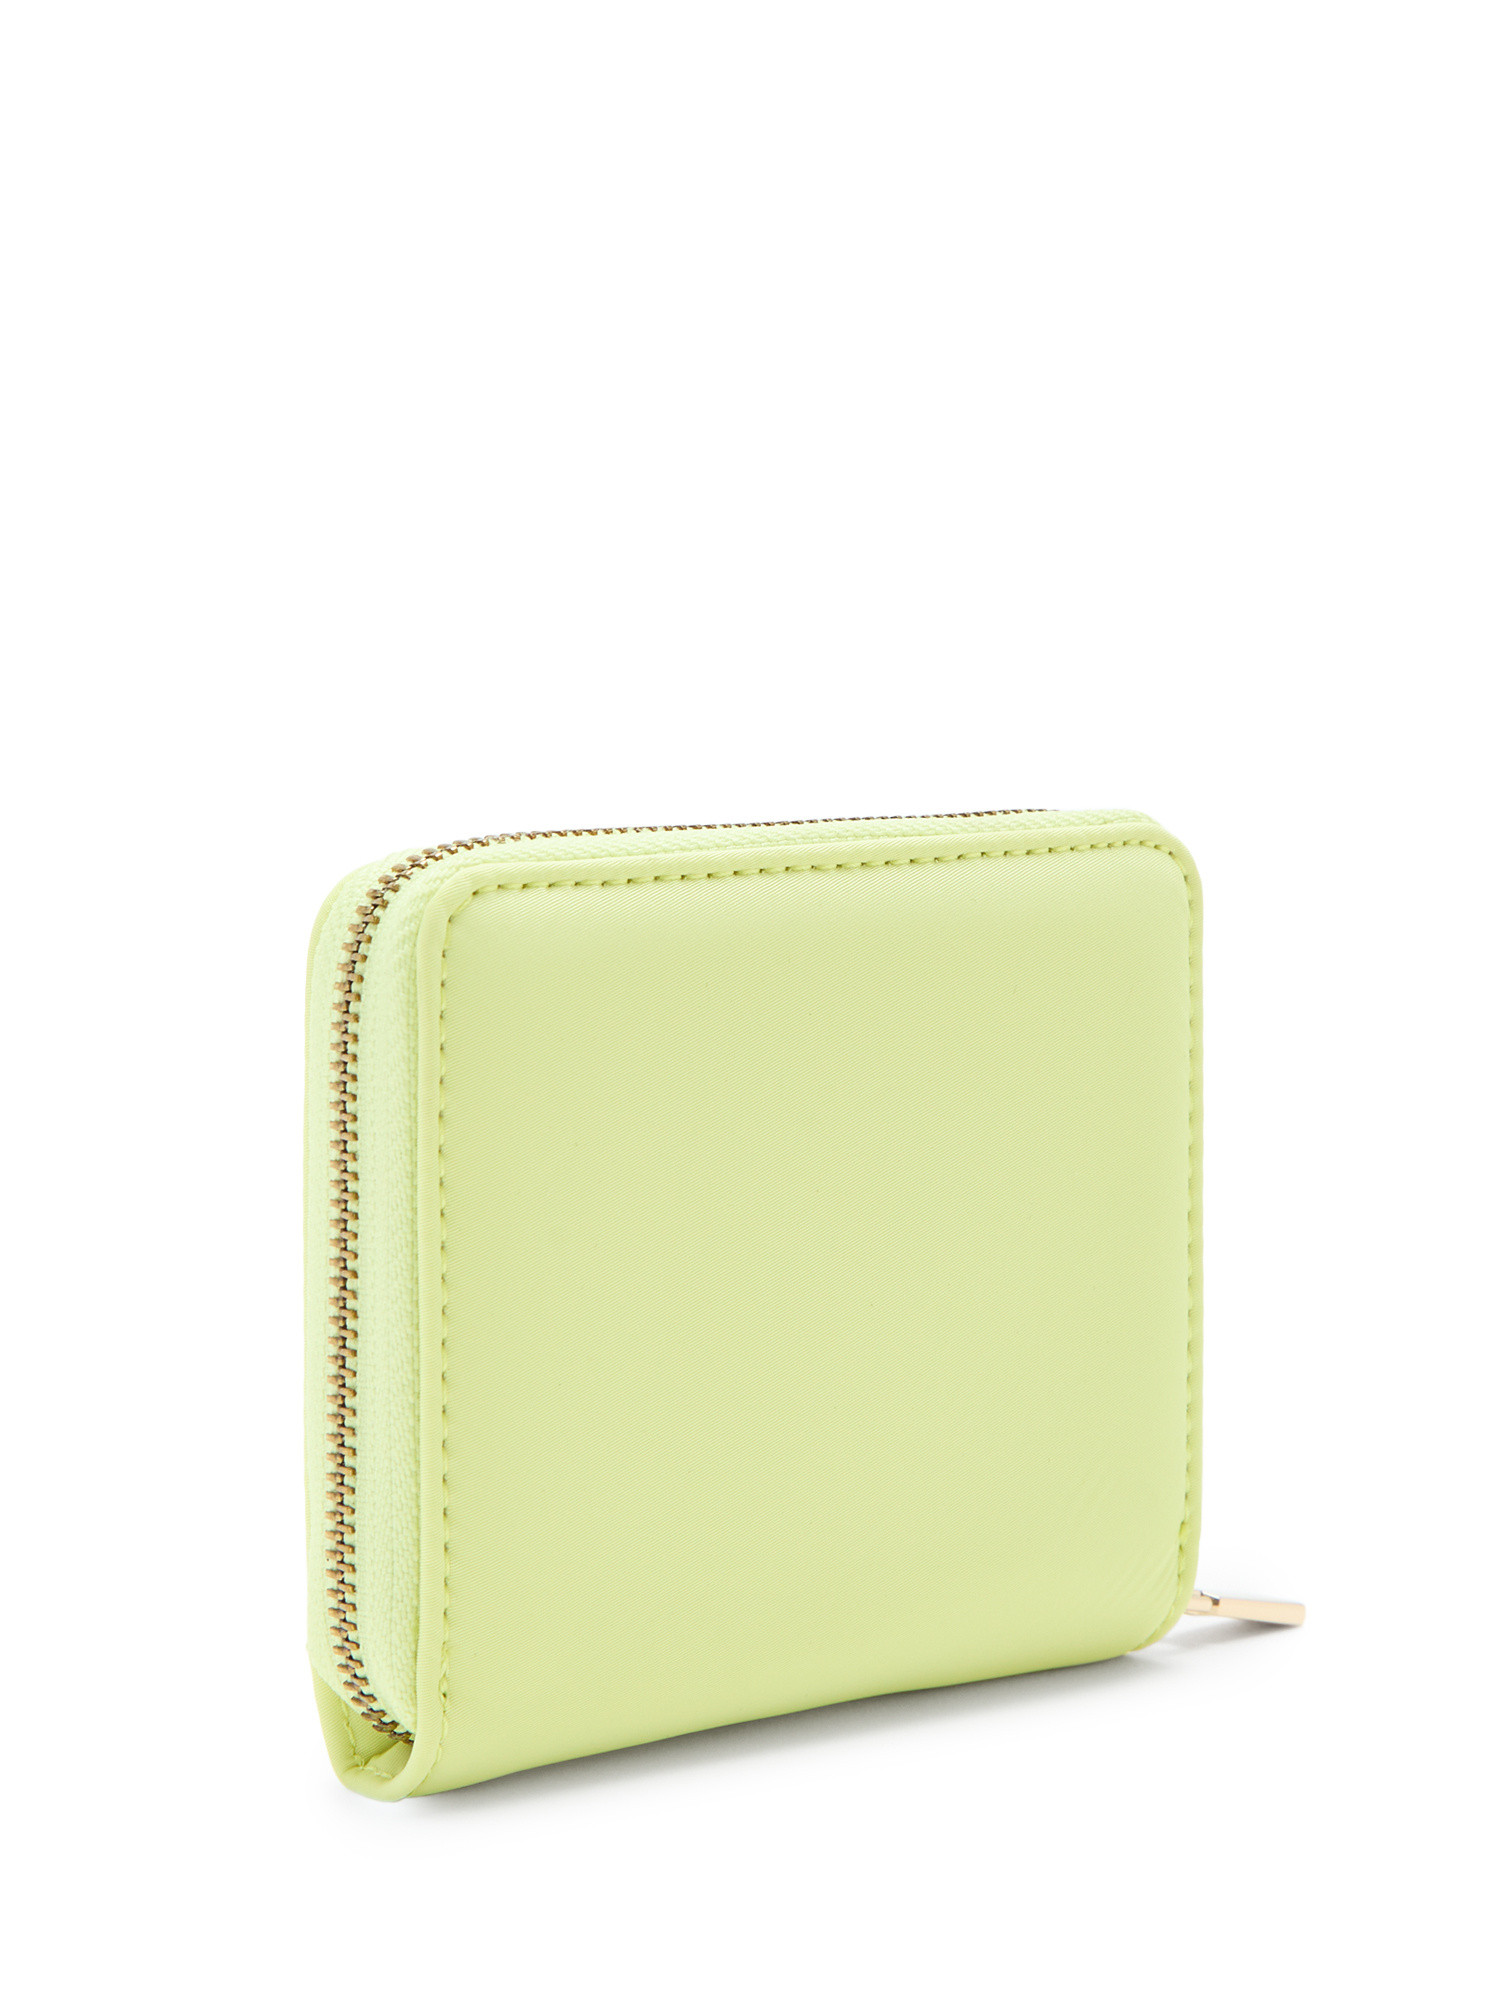 Guess - Gemma eco mini wallet, Light Yellow, large image number 1